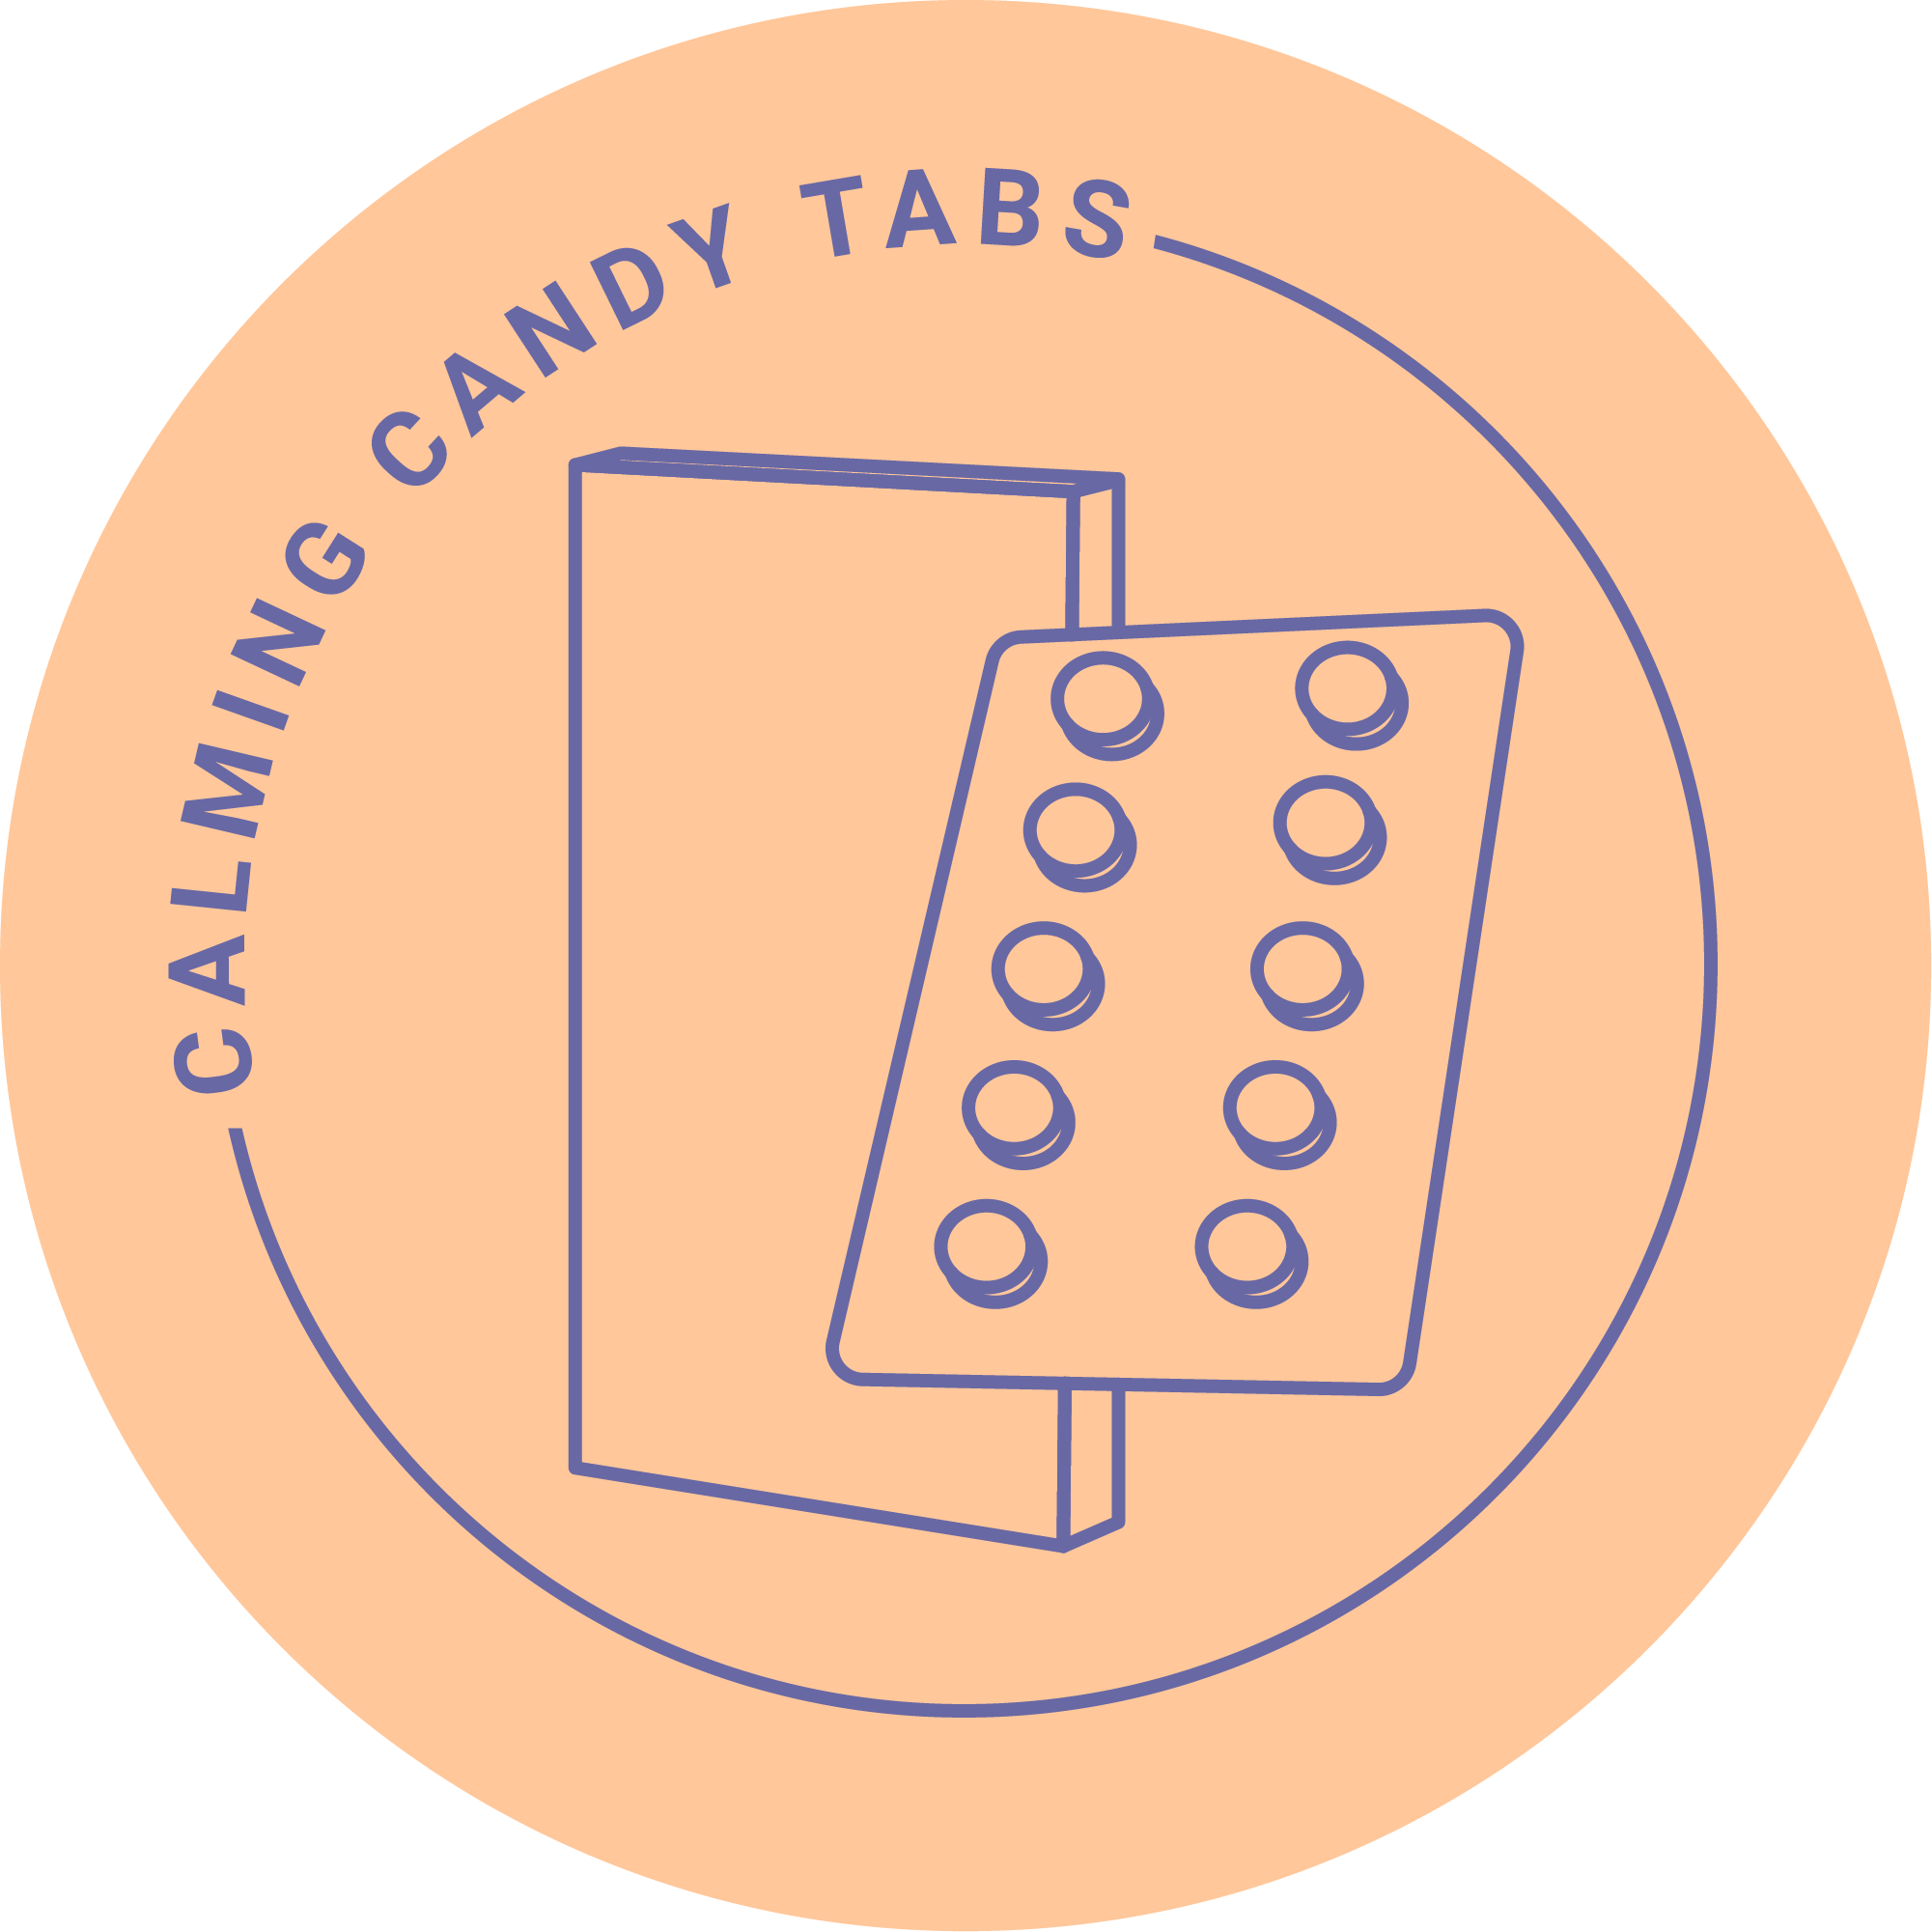 Calming Candy Tabs